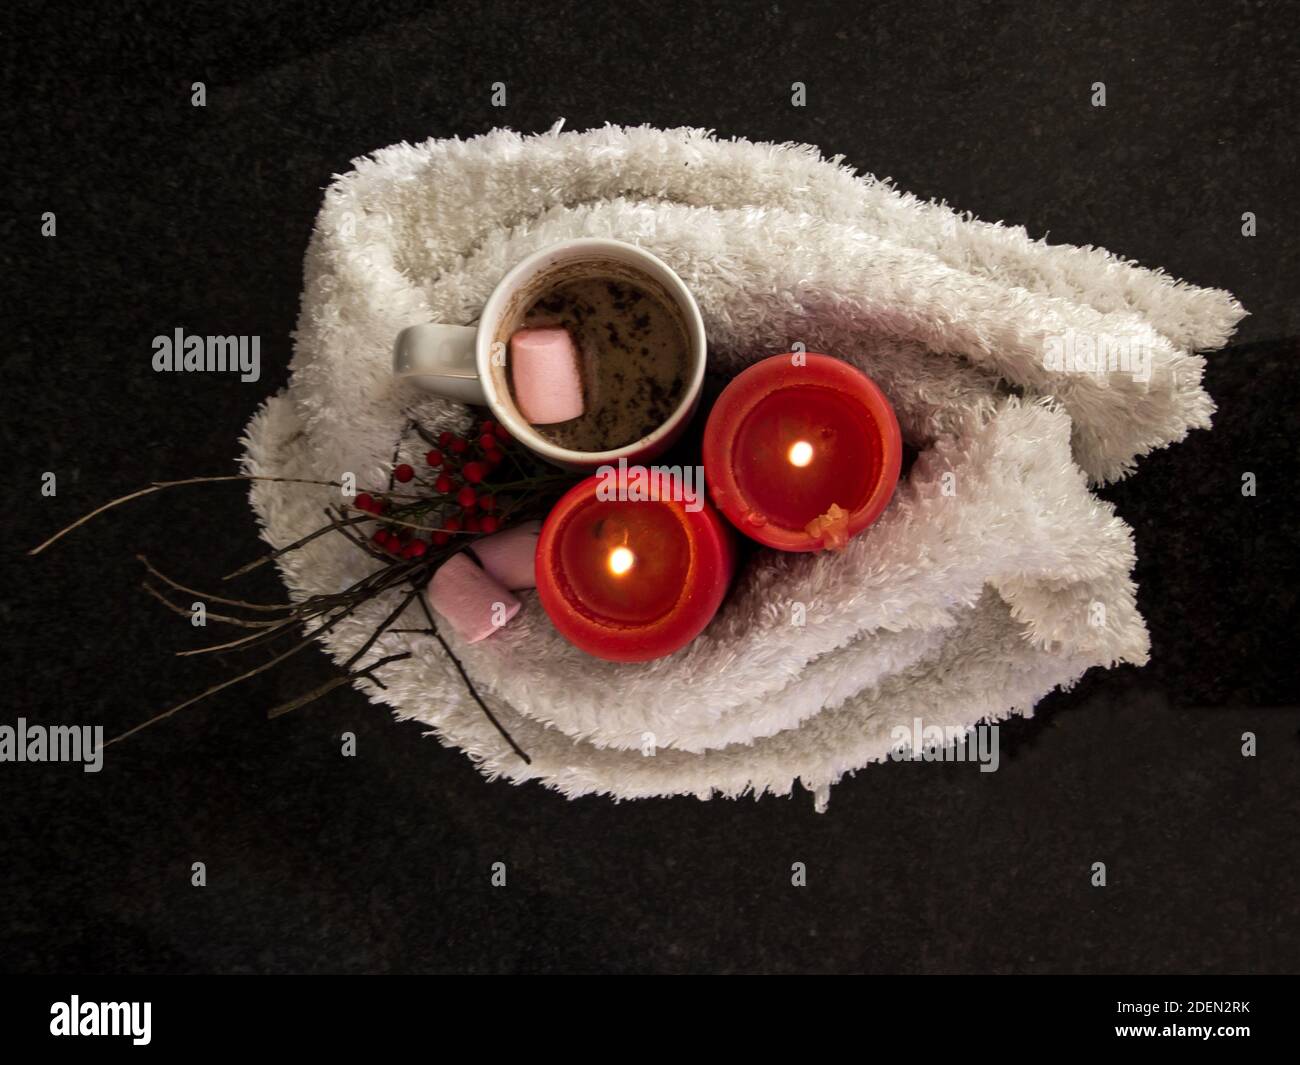 A winter inspired lay-flat, still life composition of white, red and pink Stock Photo